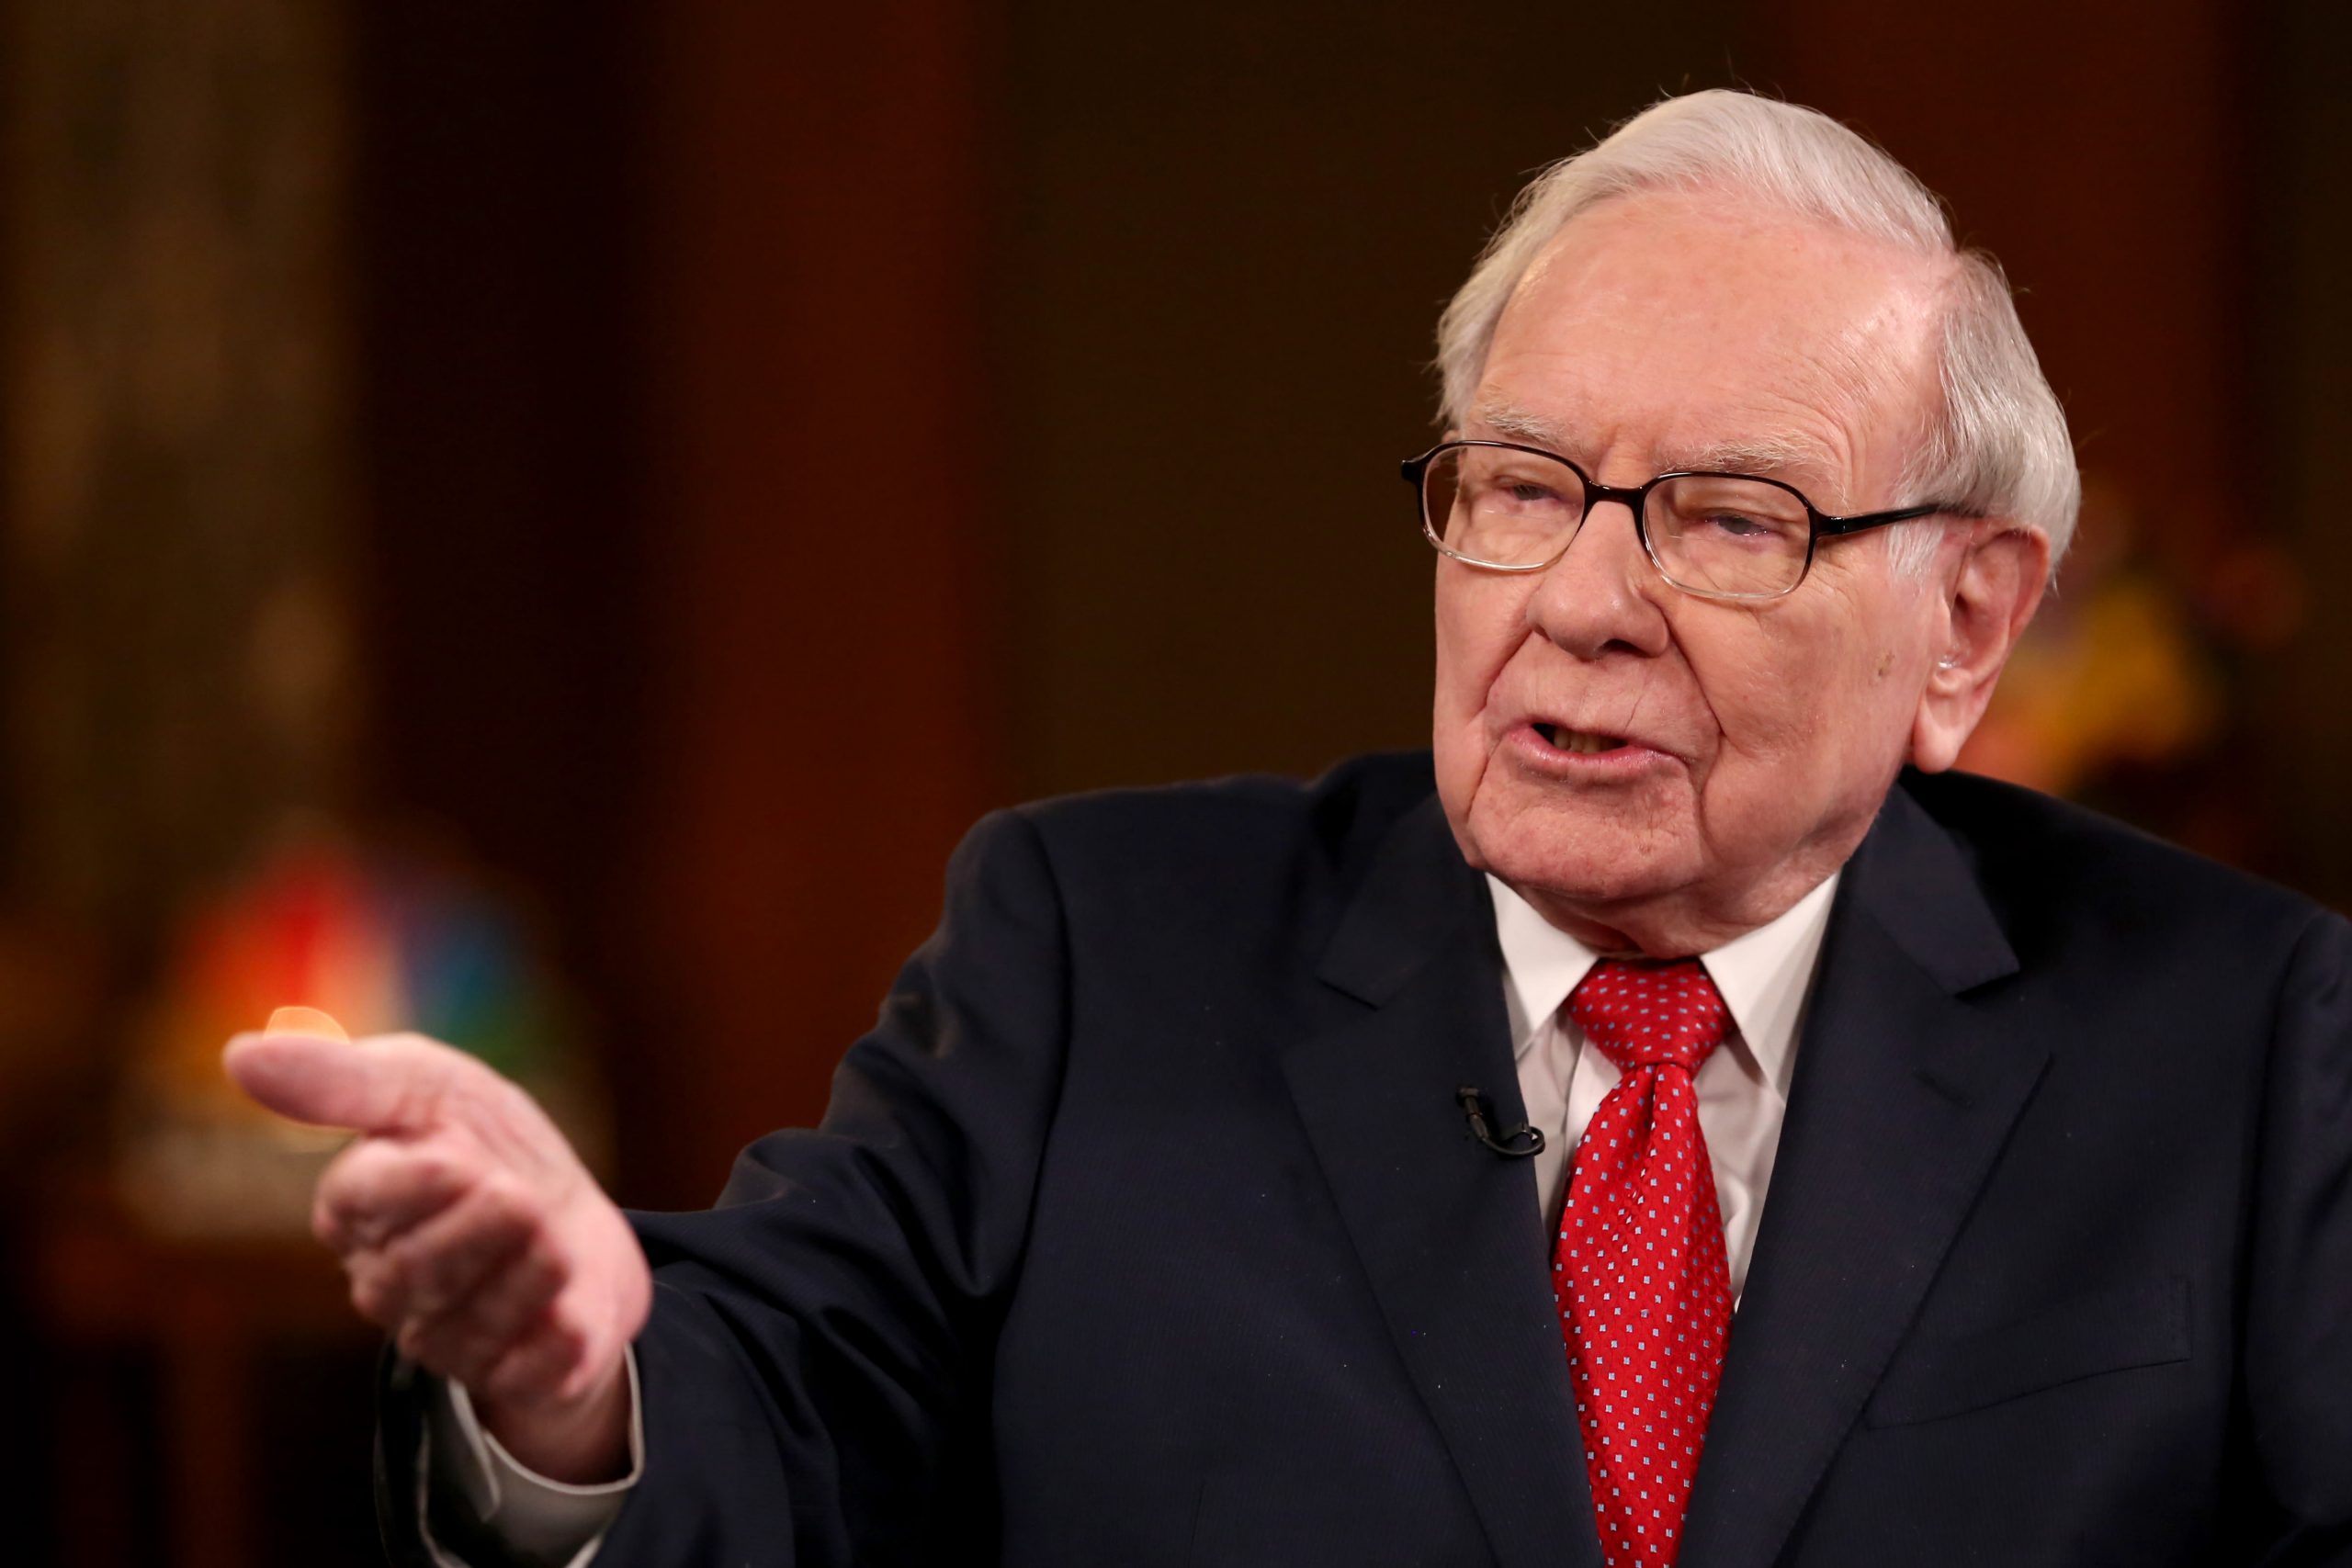 Warren Buffett’s Berkshire Hathaway annual assembly to be digital once more